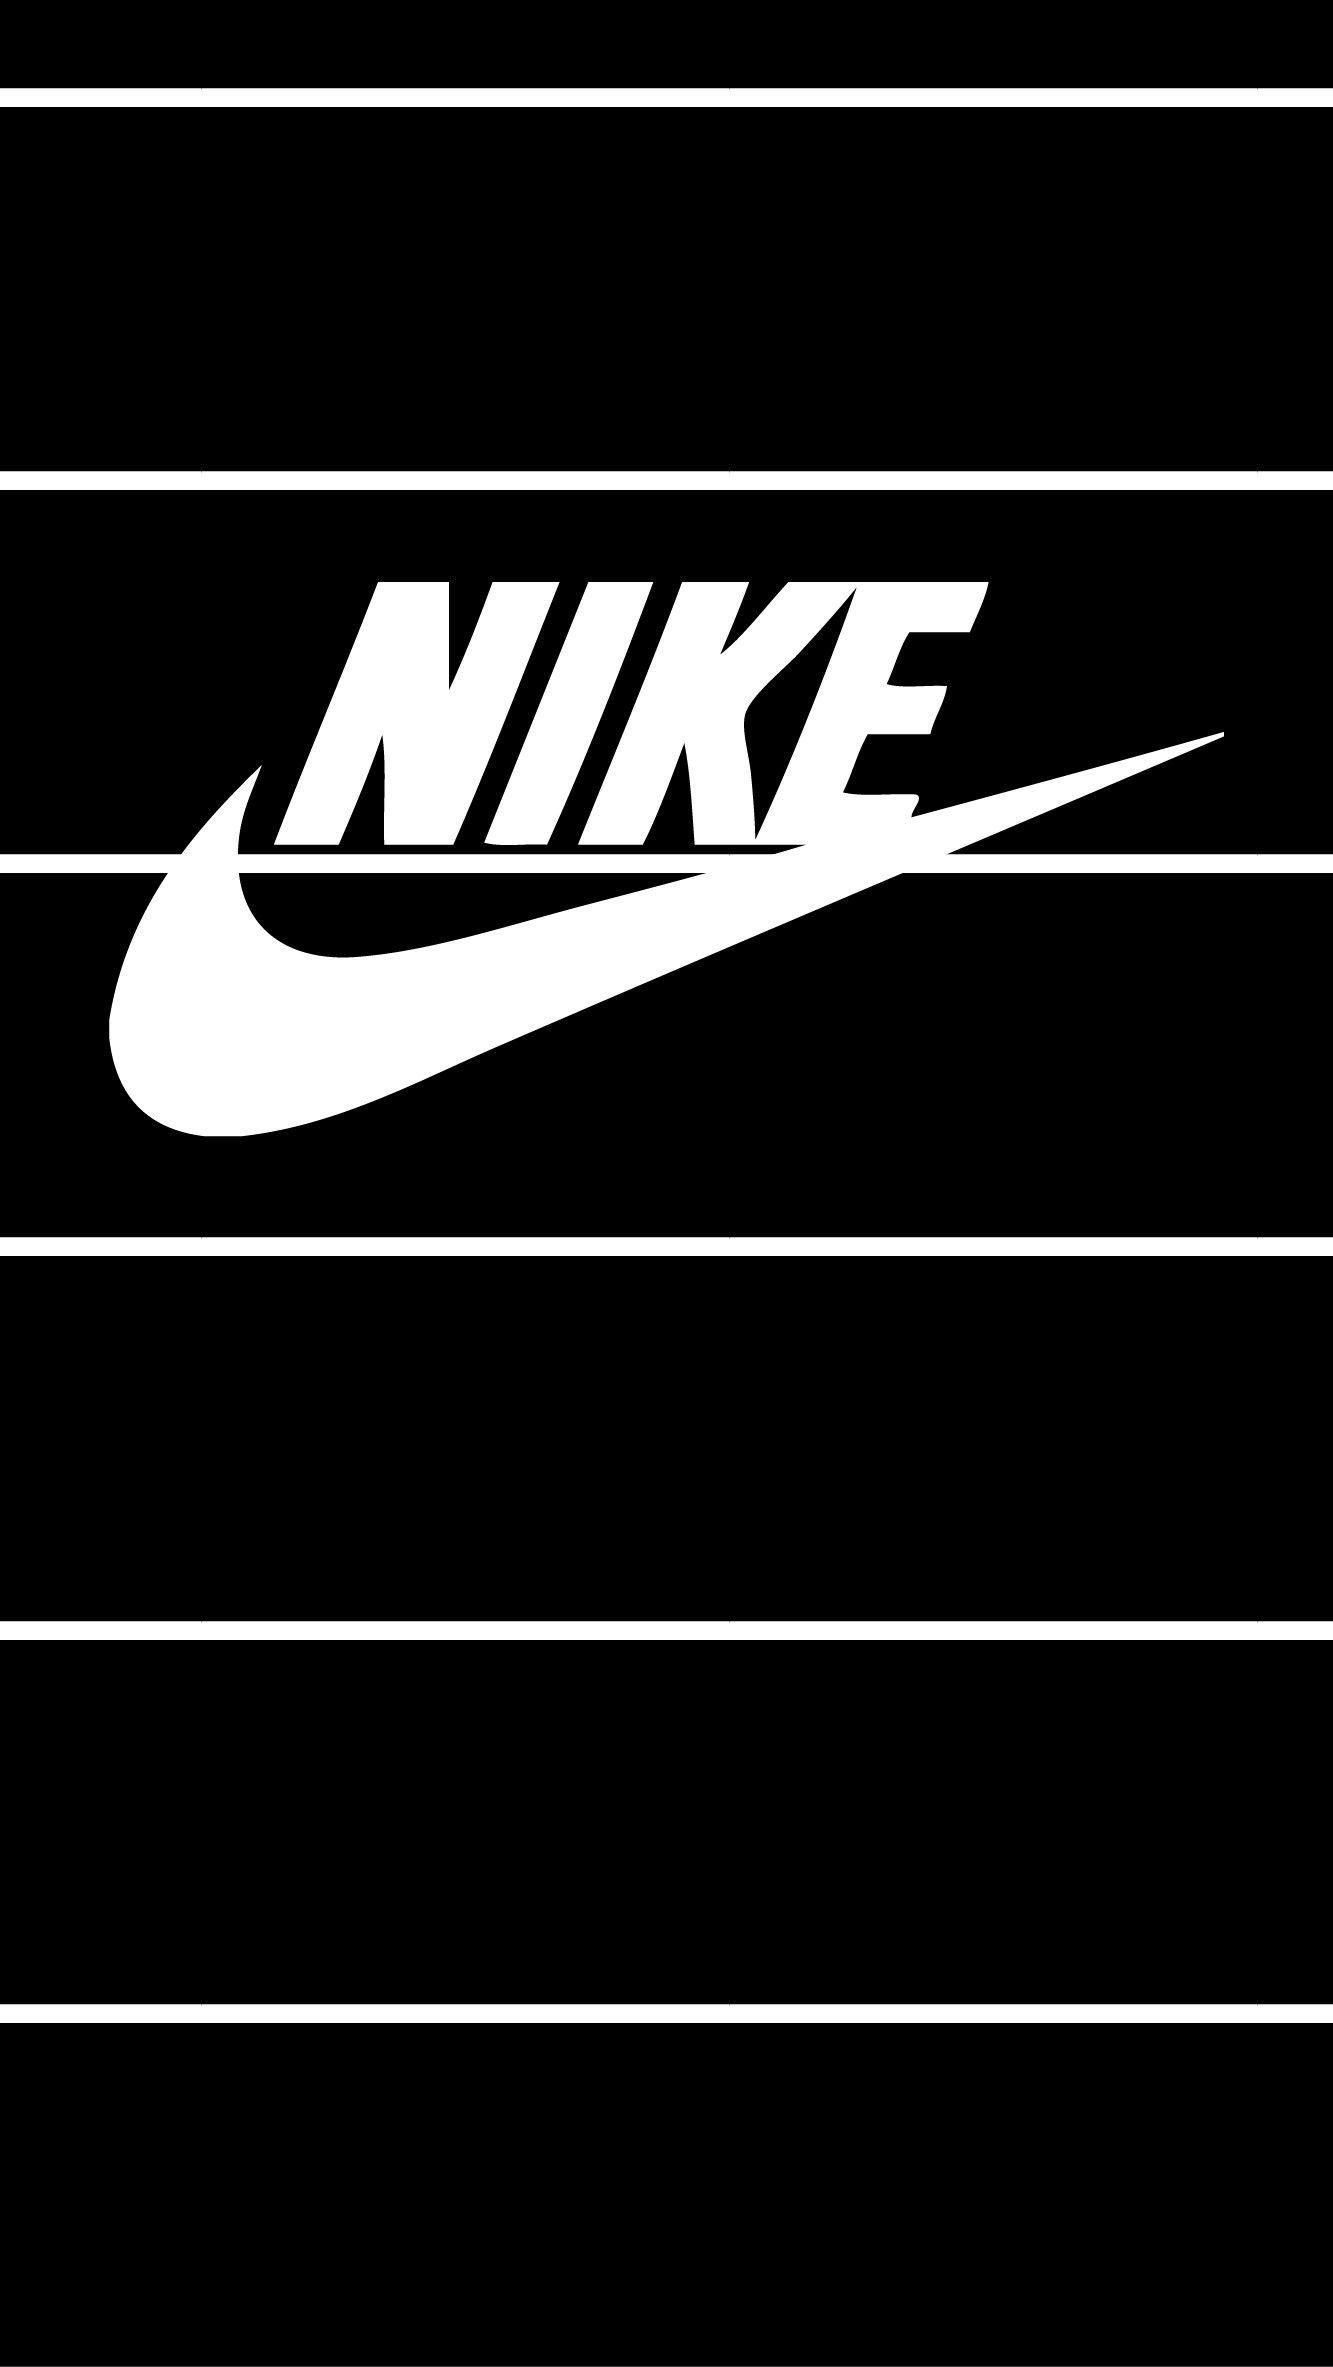 Nike wallpaper for iPhone and Android! - Nike